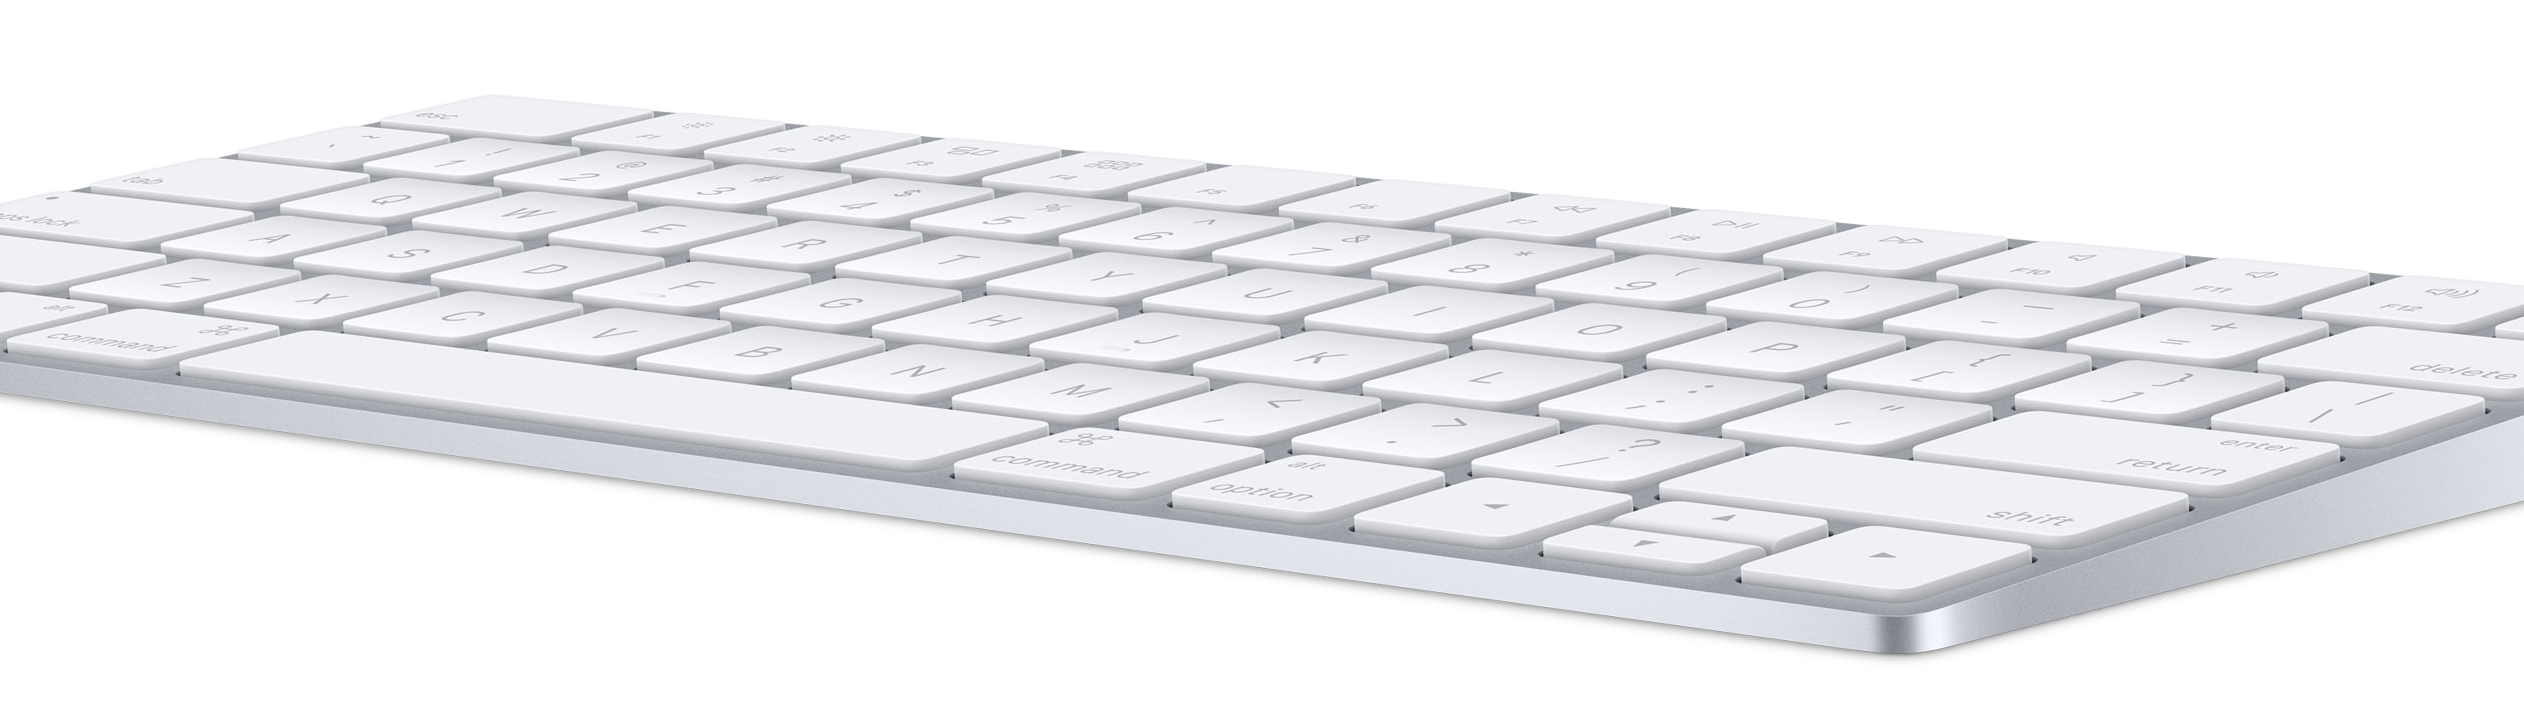 Screen Shot 2015 10 13 at 10.09.45 PM - Apple launches the Magic Trackpad 2 with Force Touch, Magic Mouse 2 & Magic Keyboard